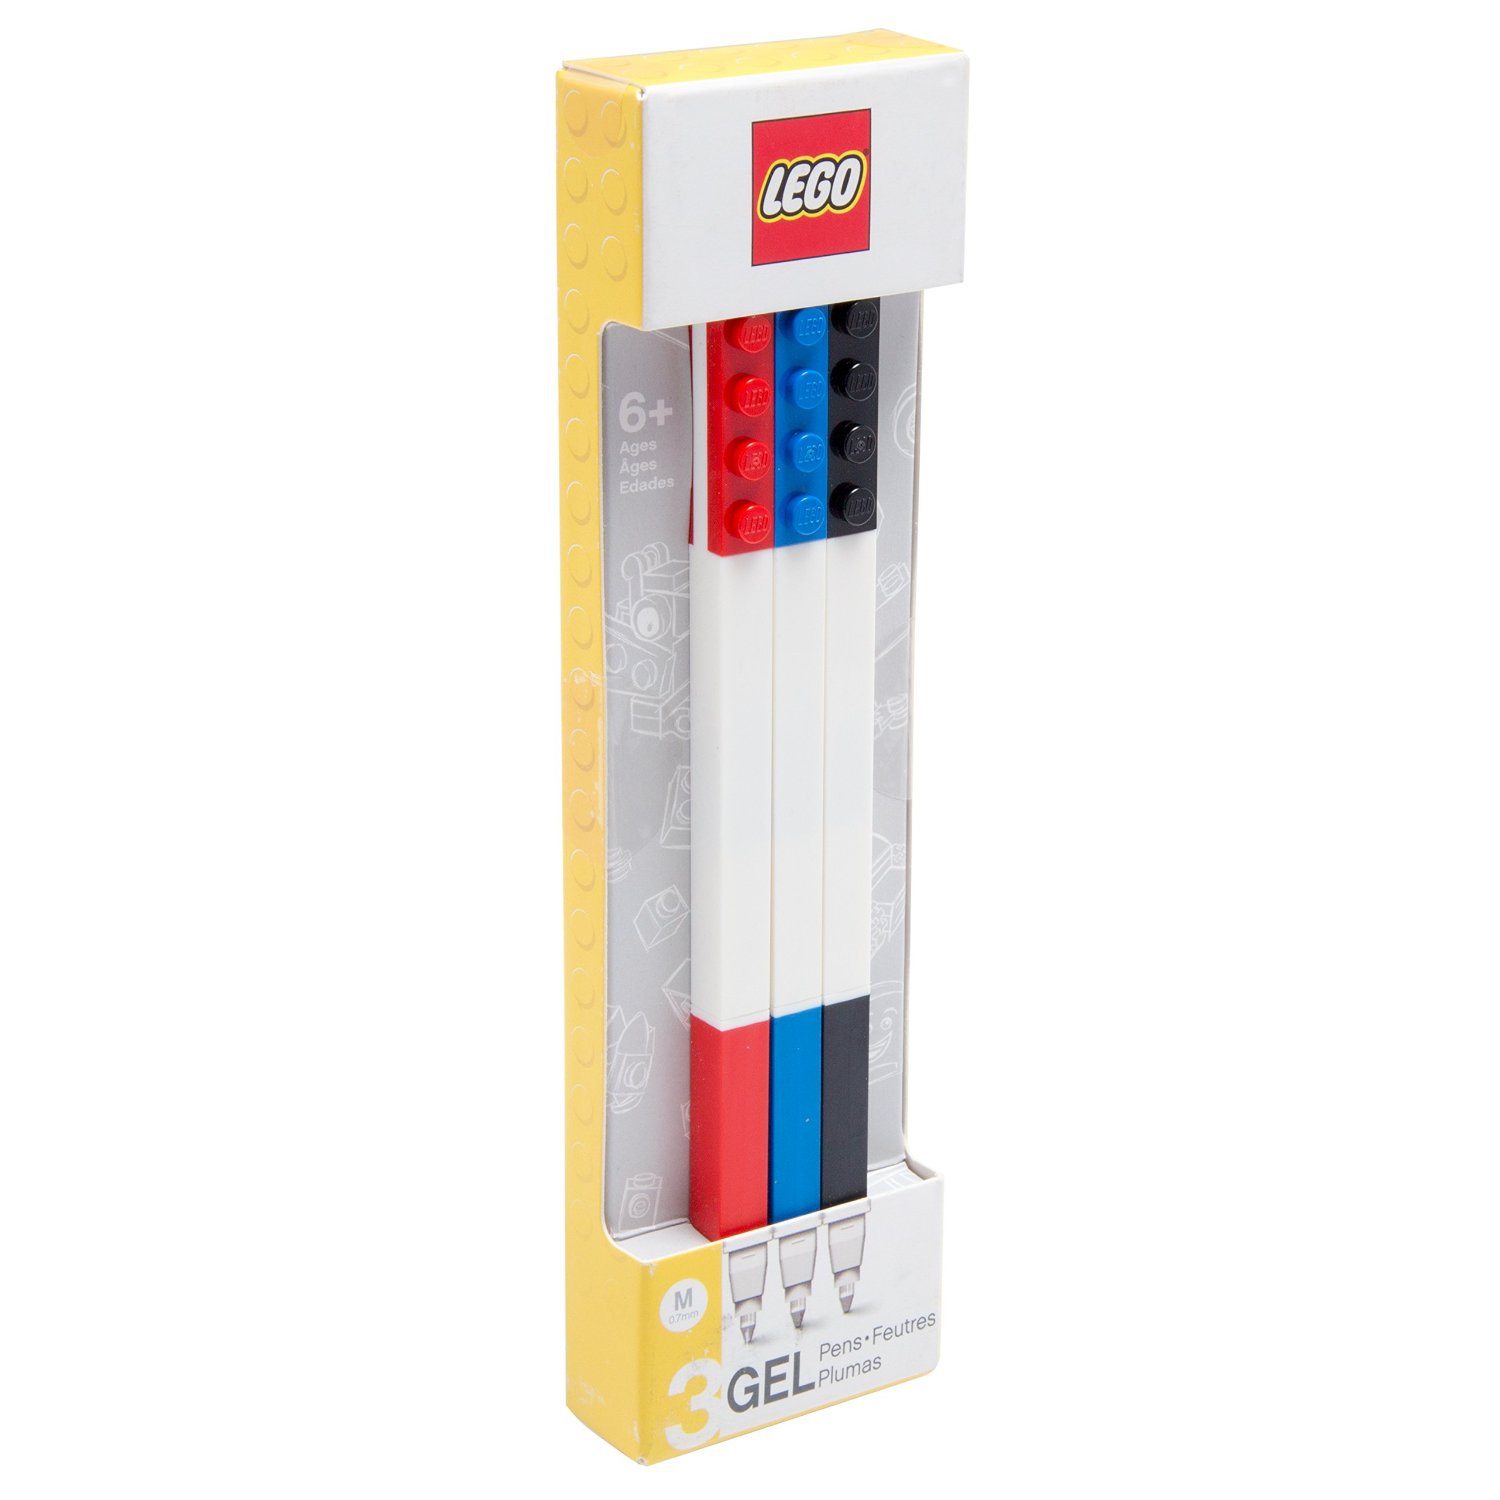 Lego 3 Pack 'Assorted Colours' Gel Pen Stationery